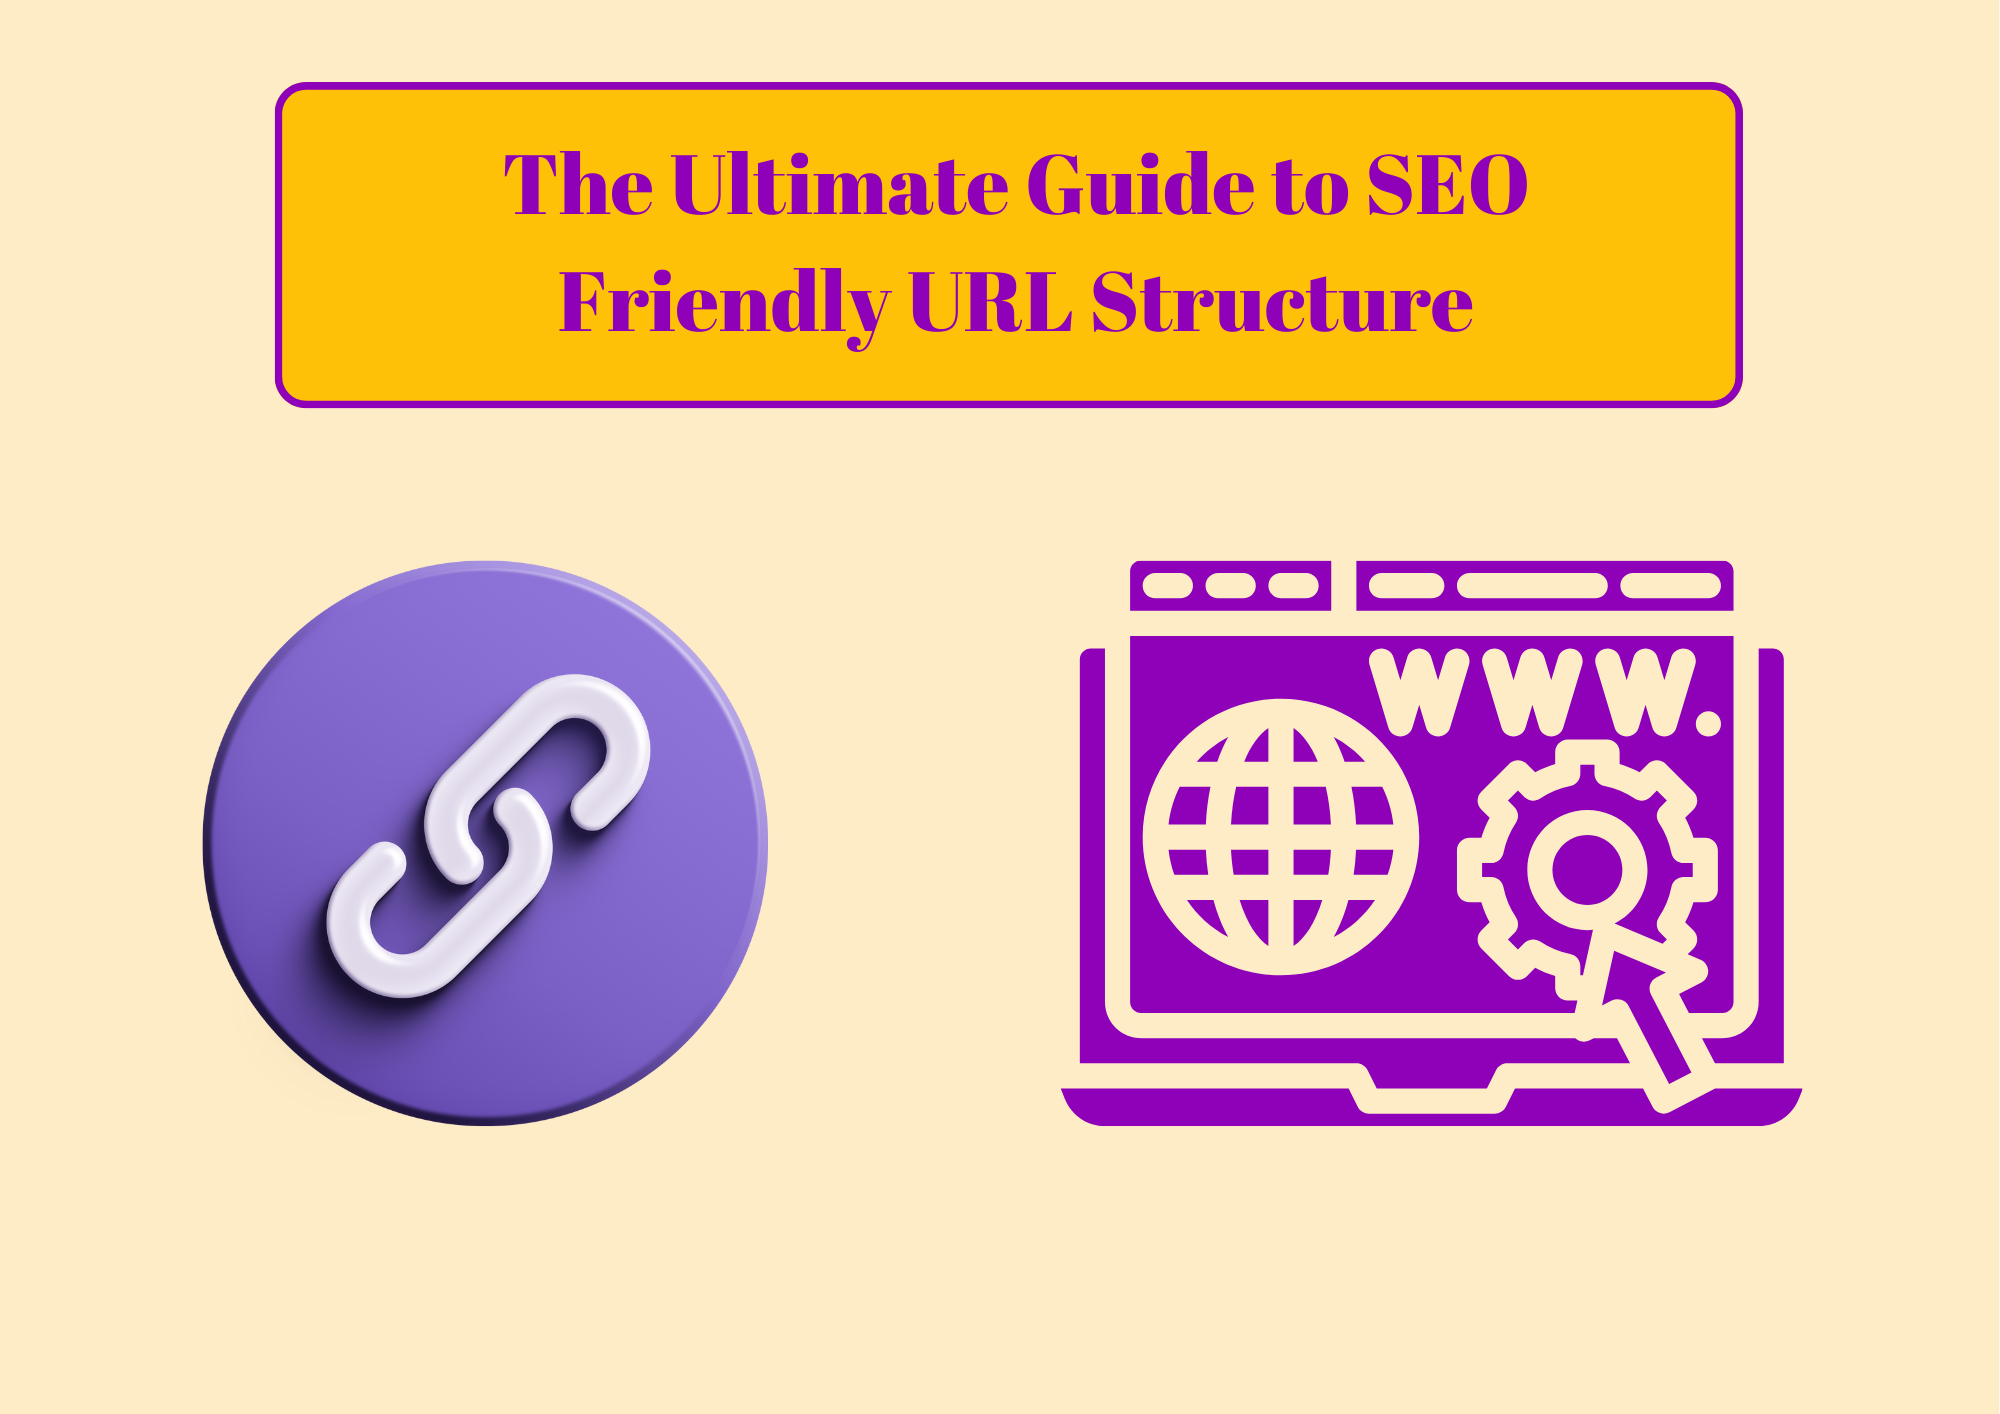 The Ultimate Guide to SEO Friendly URL Structure